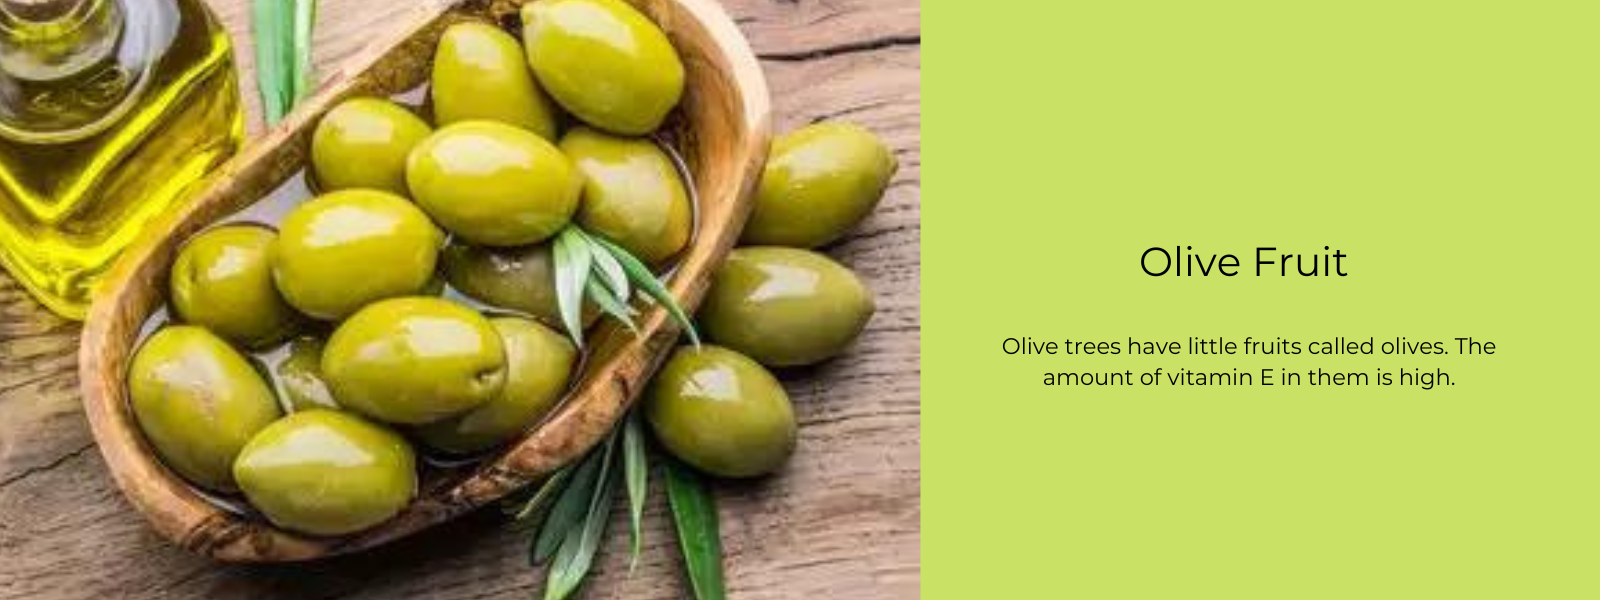 Olive Fruit – Health Benefits, Uses and Important Facts